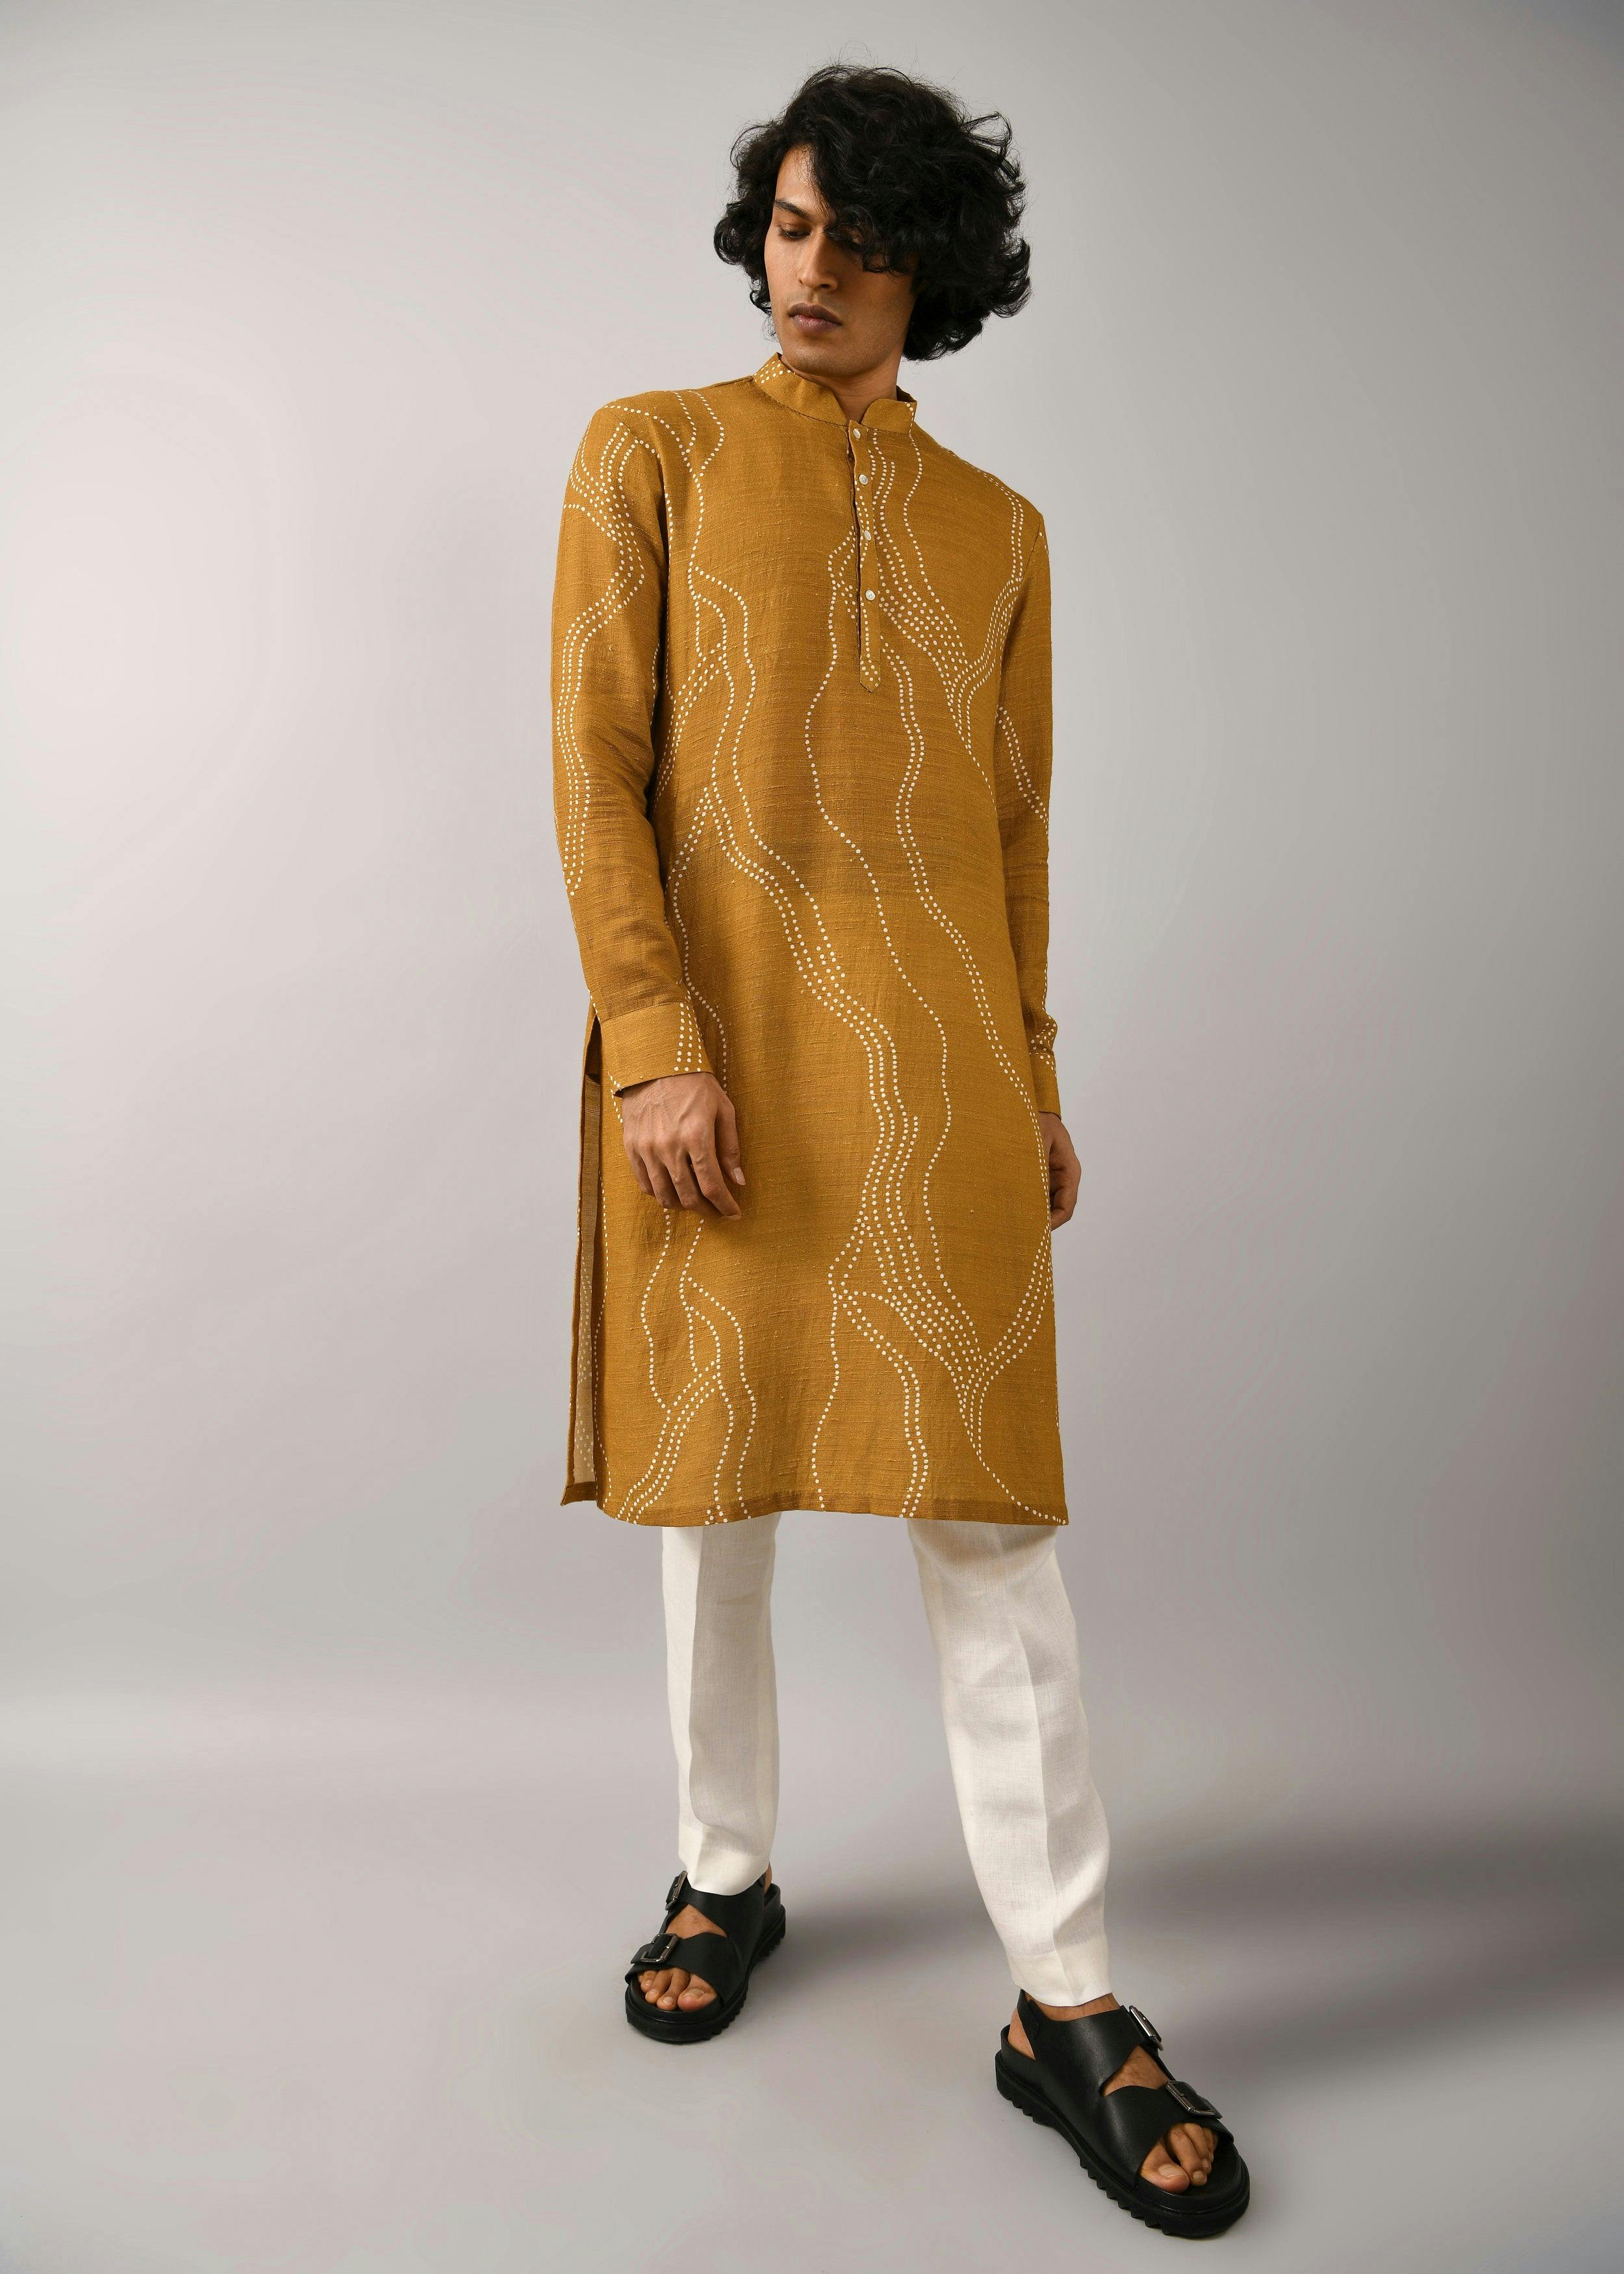 Constellation Printed Kurta, a product by Country Made